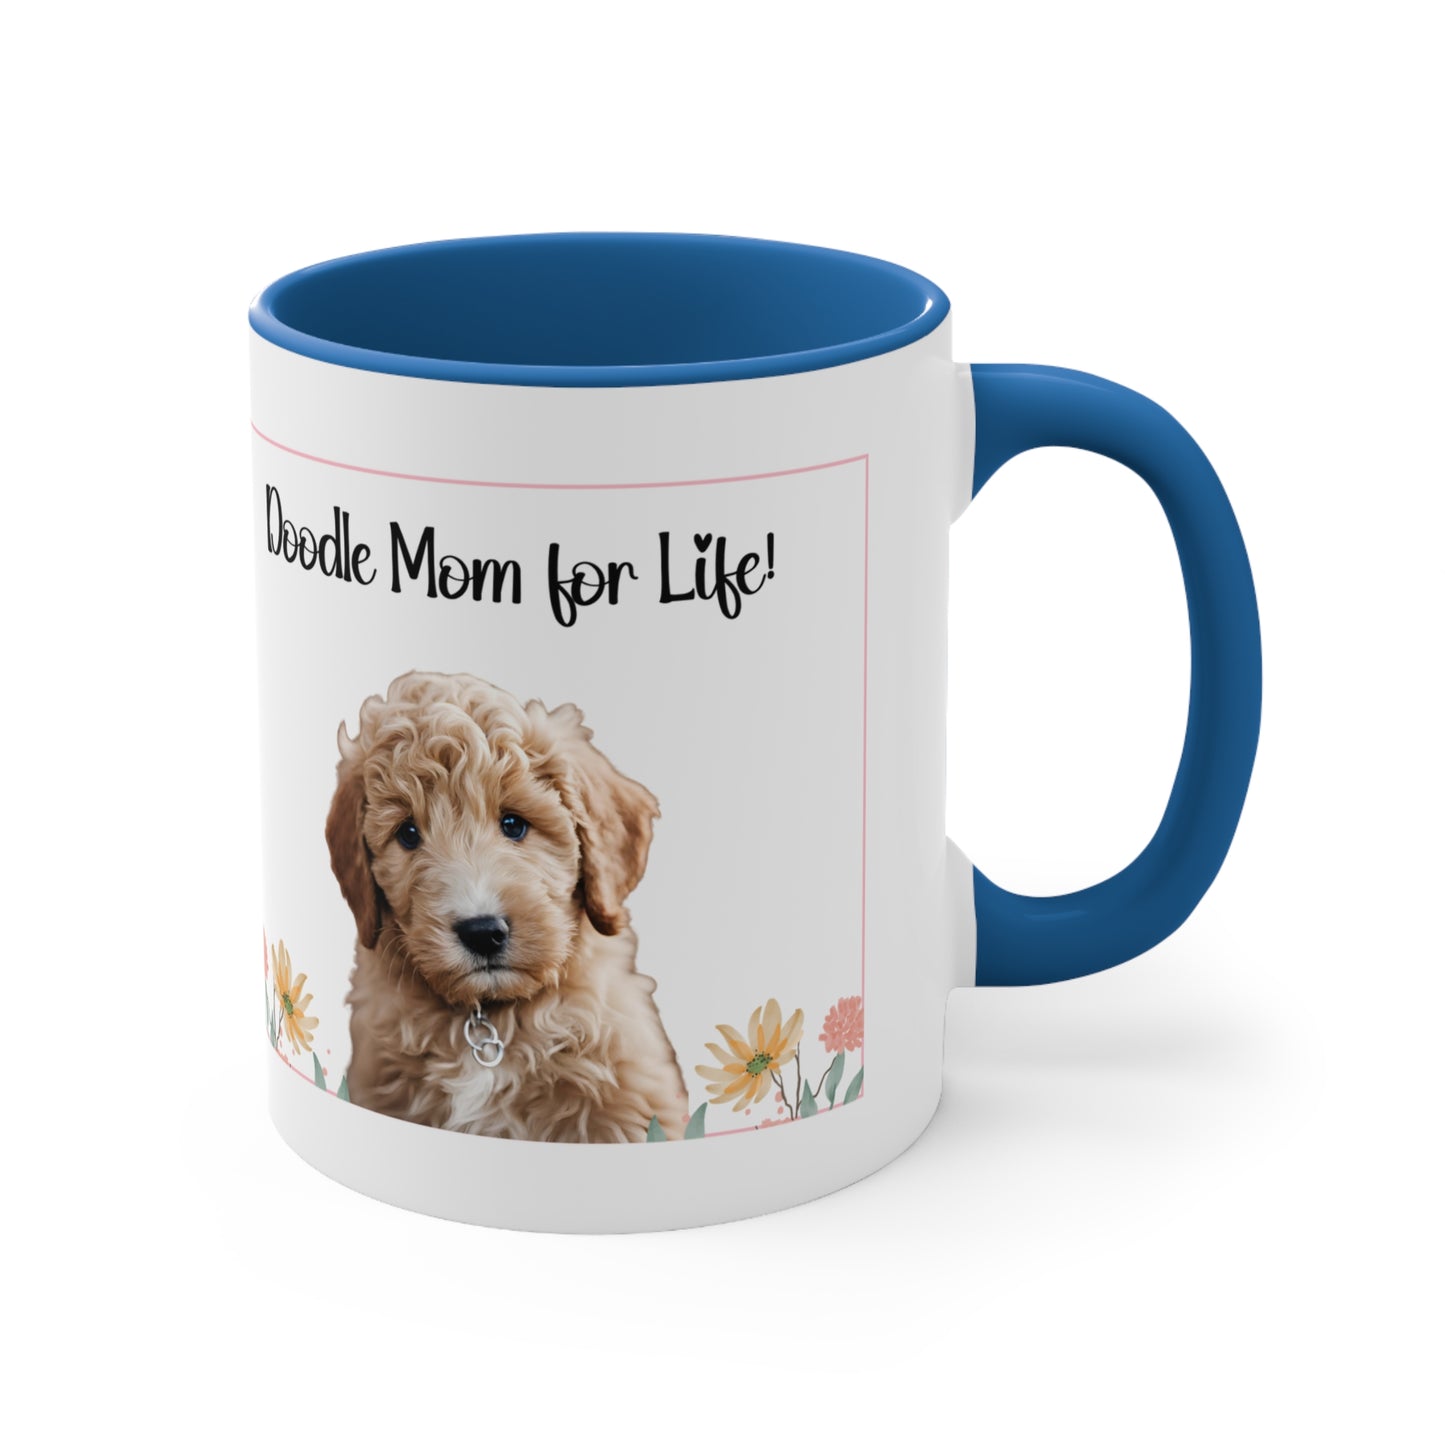 Golden doodle coffee mug, 11 oz hor gift or self, front view in blue.